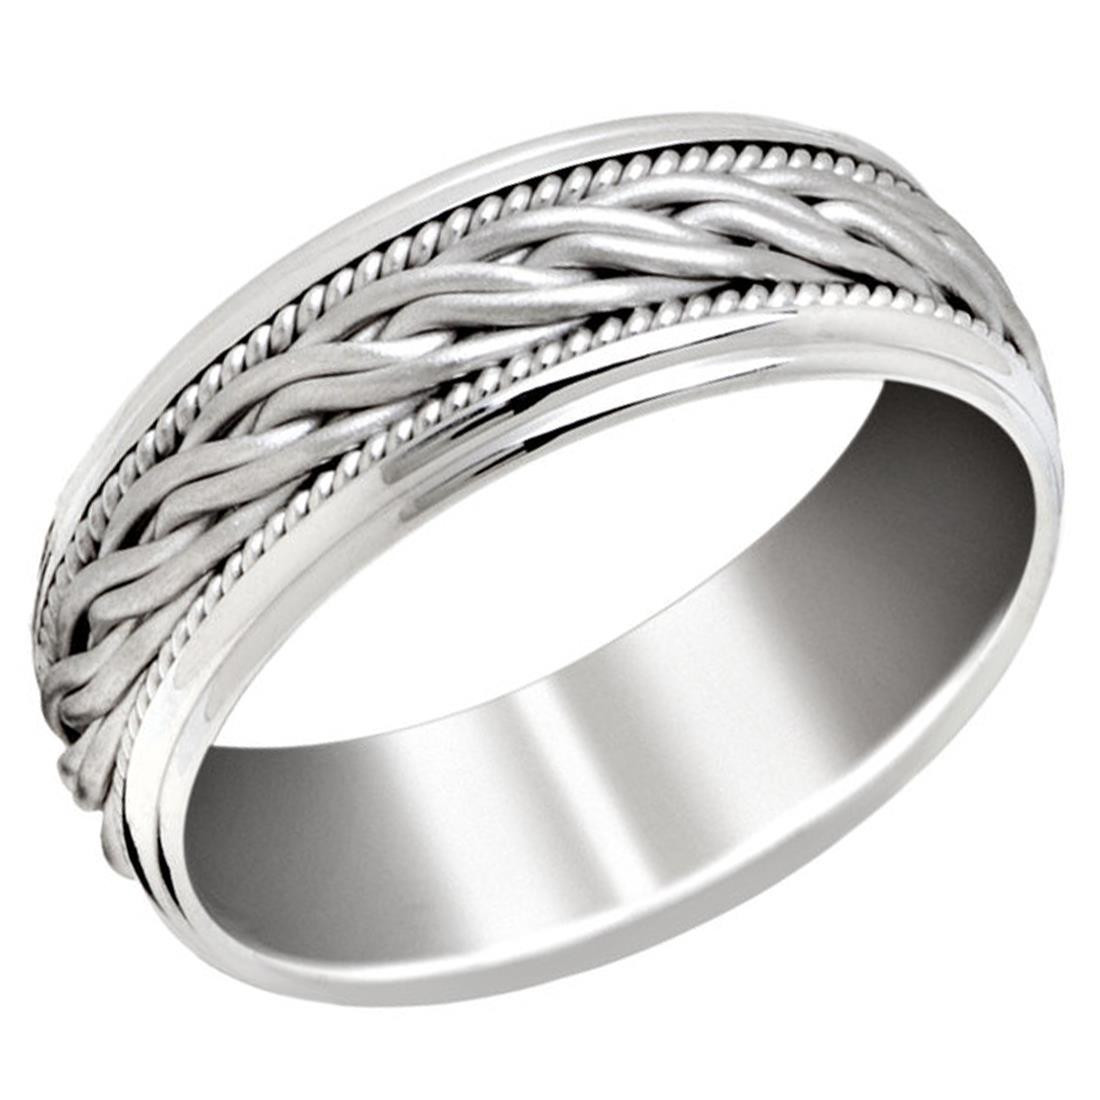 Mens 8 MM band with braided center and milgrain detailing in White Gold ...